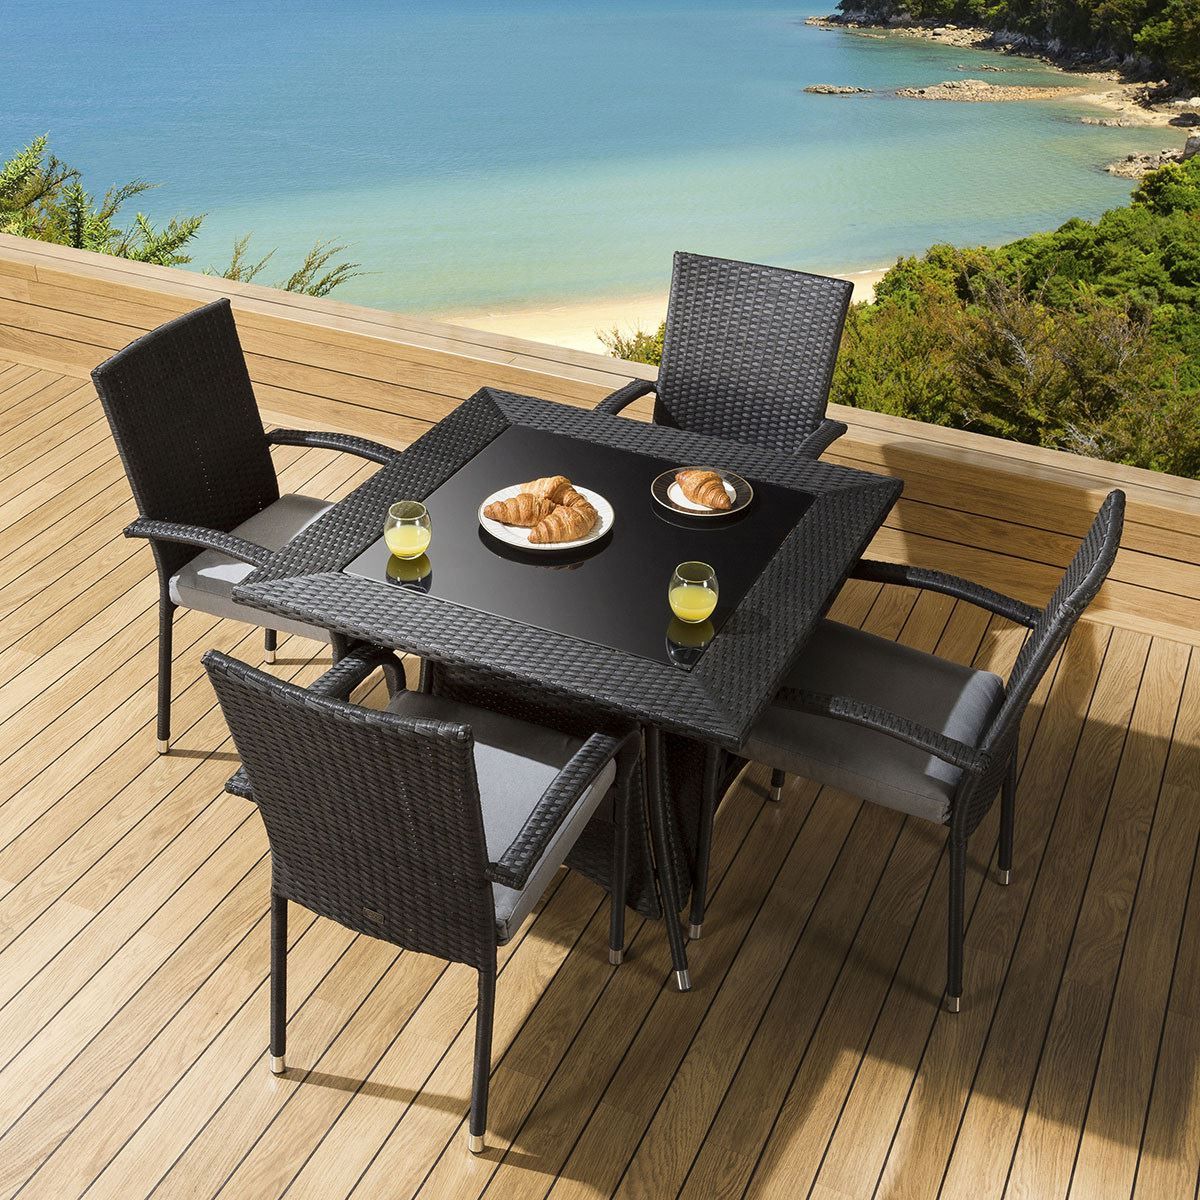 Trendy Outdoor Dining Set Square Table 4 Armed Black Chairs Grey Cushions Pertaining To Black And Gray Outdoor Table And Chair Sets (View 4 of 15)